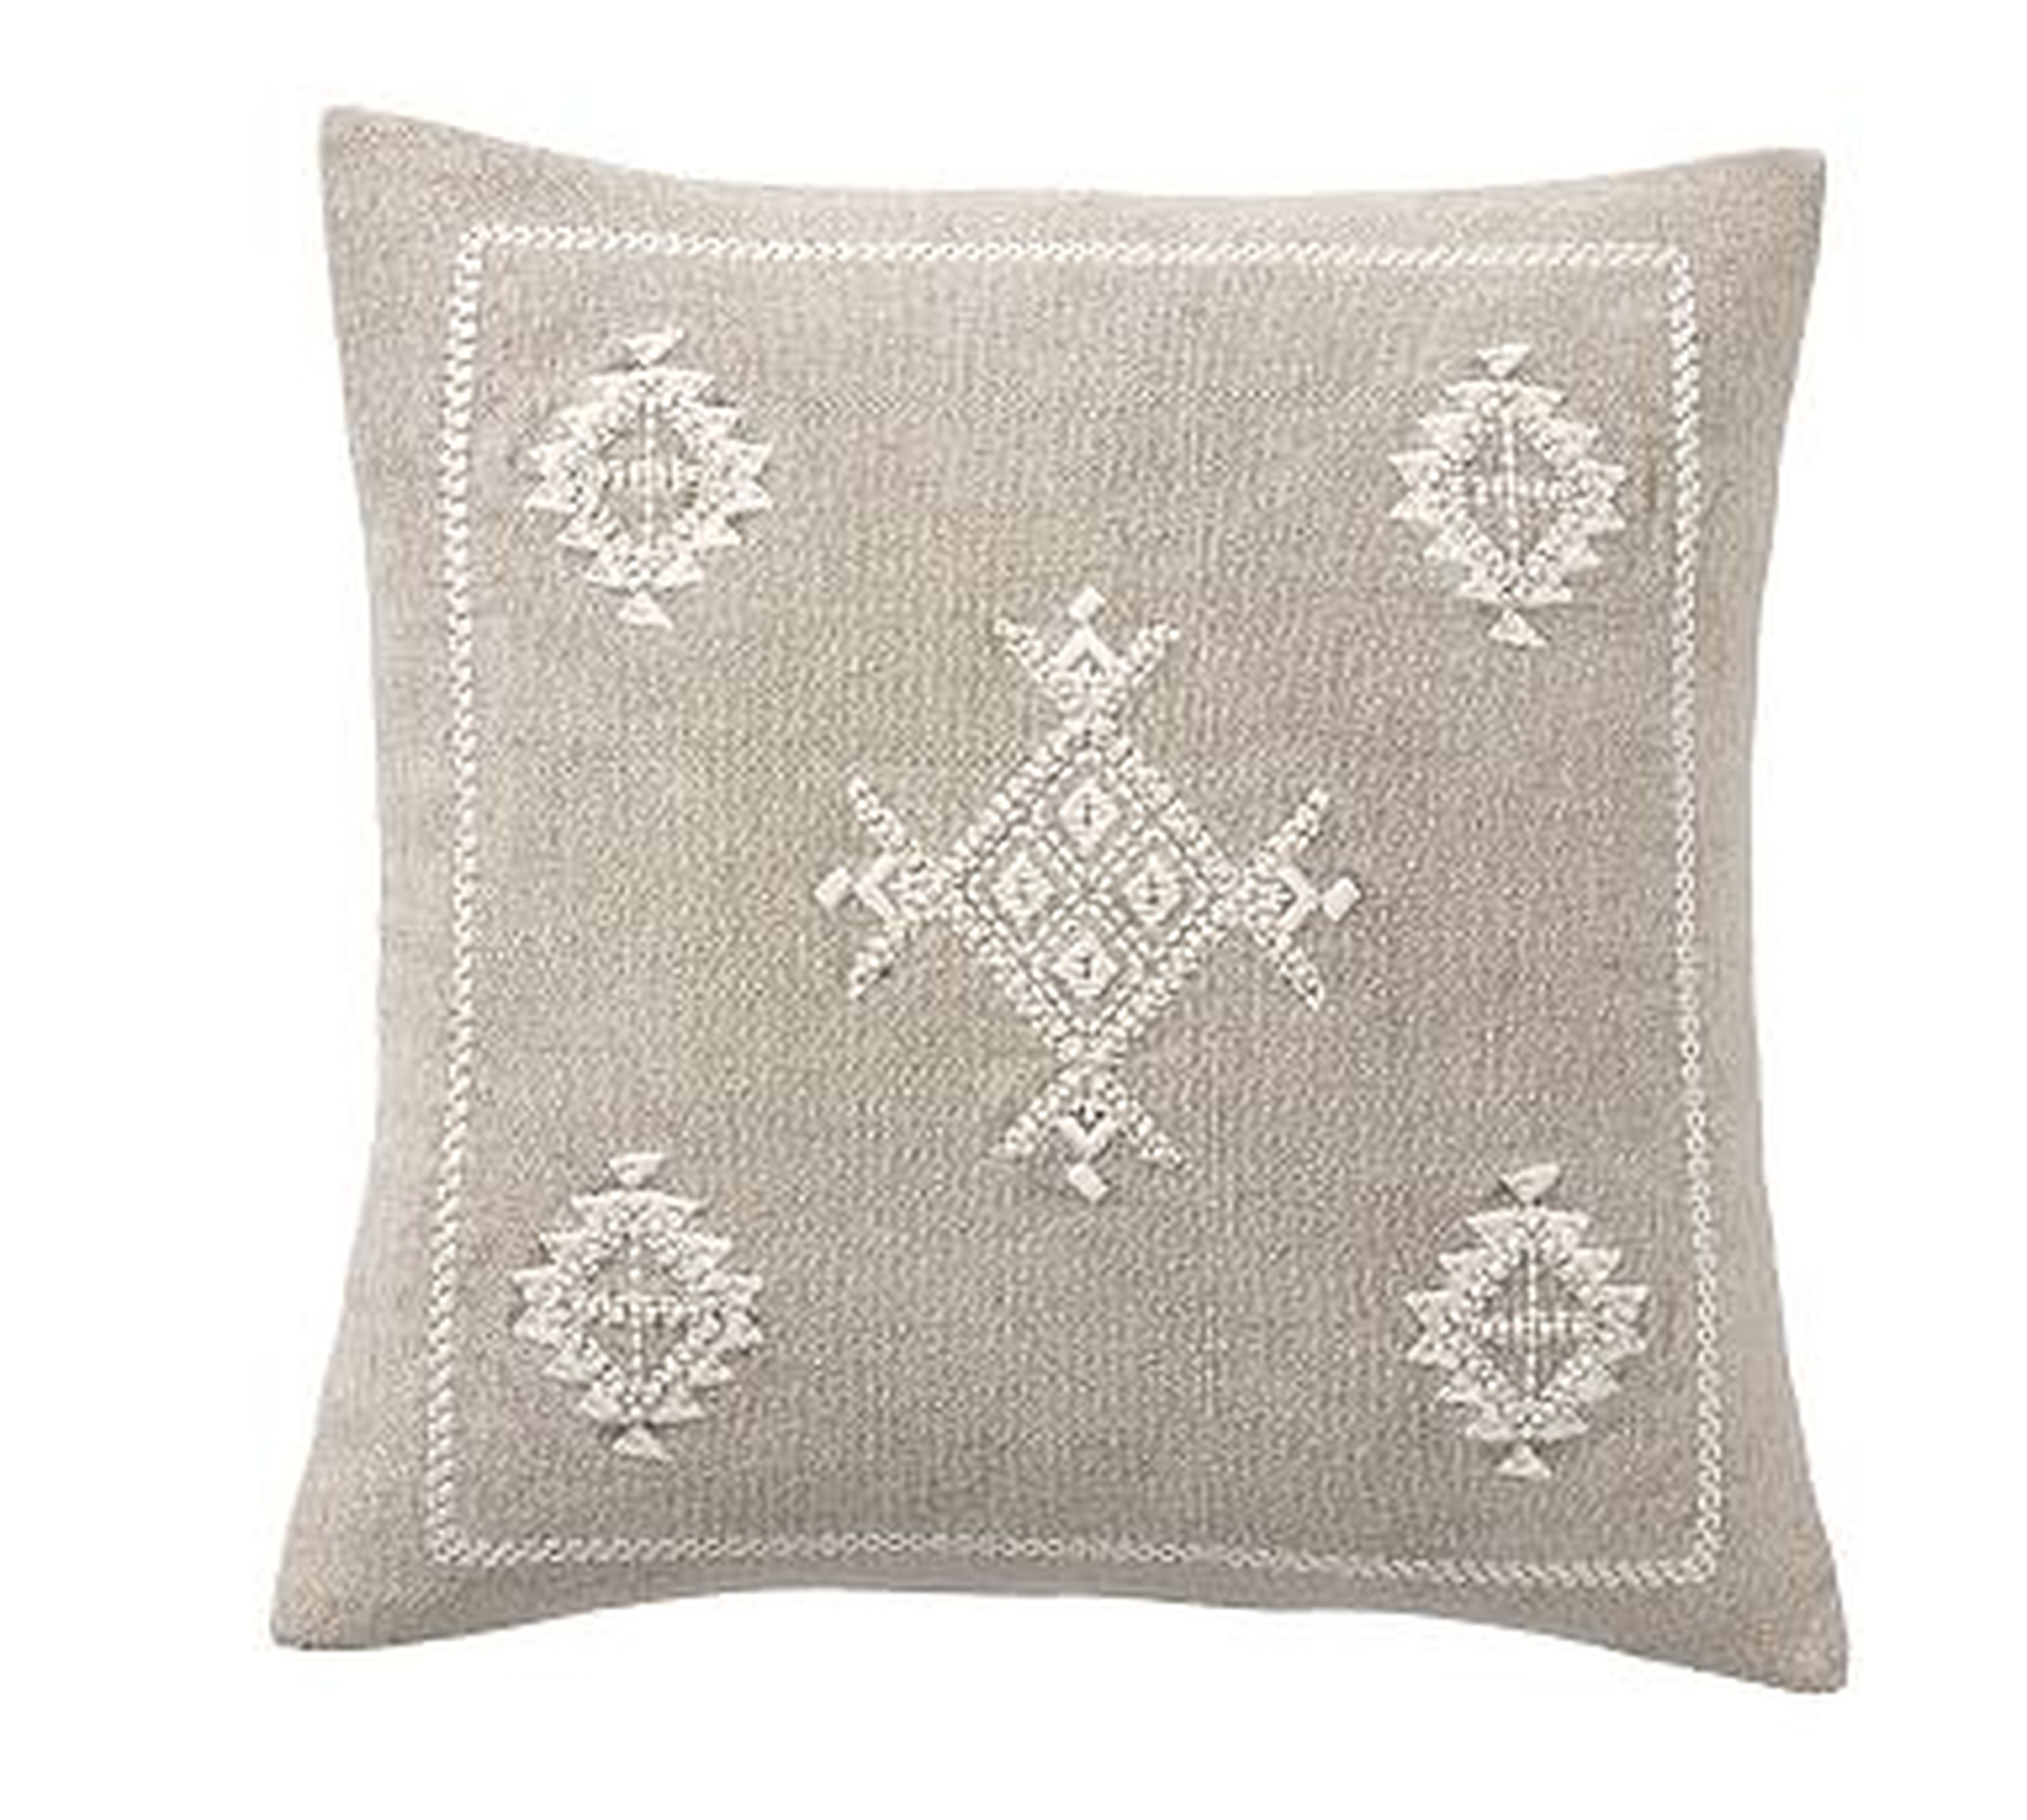 Kalera Embroidered Pillow Cover, 18", Neutral - Pottery Barn